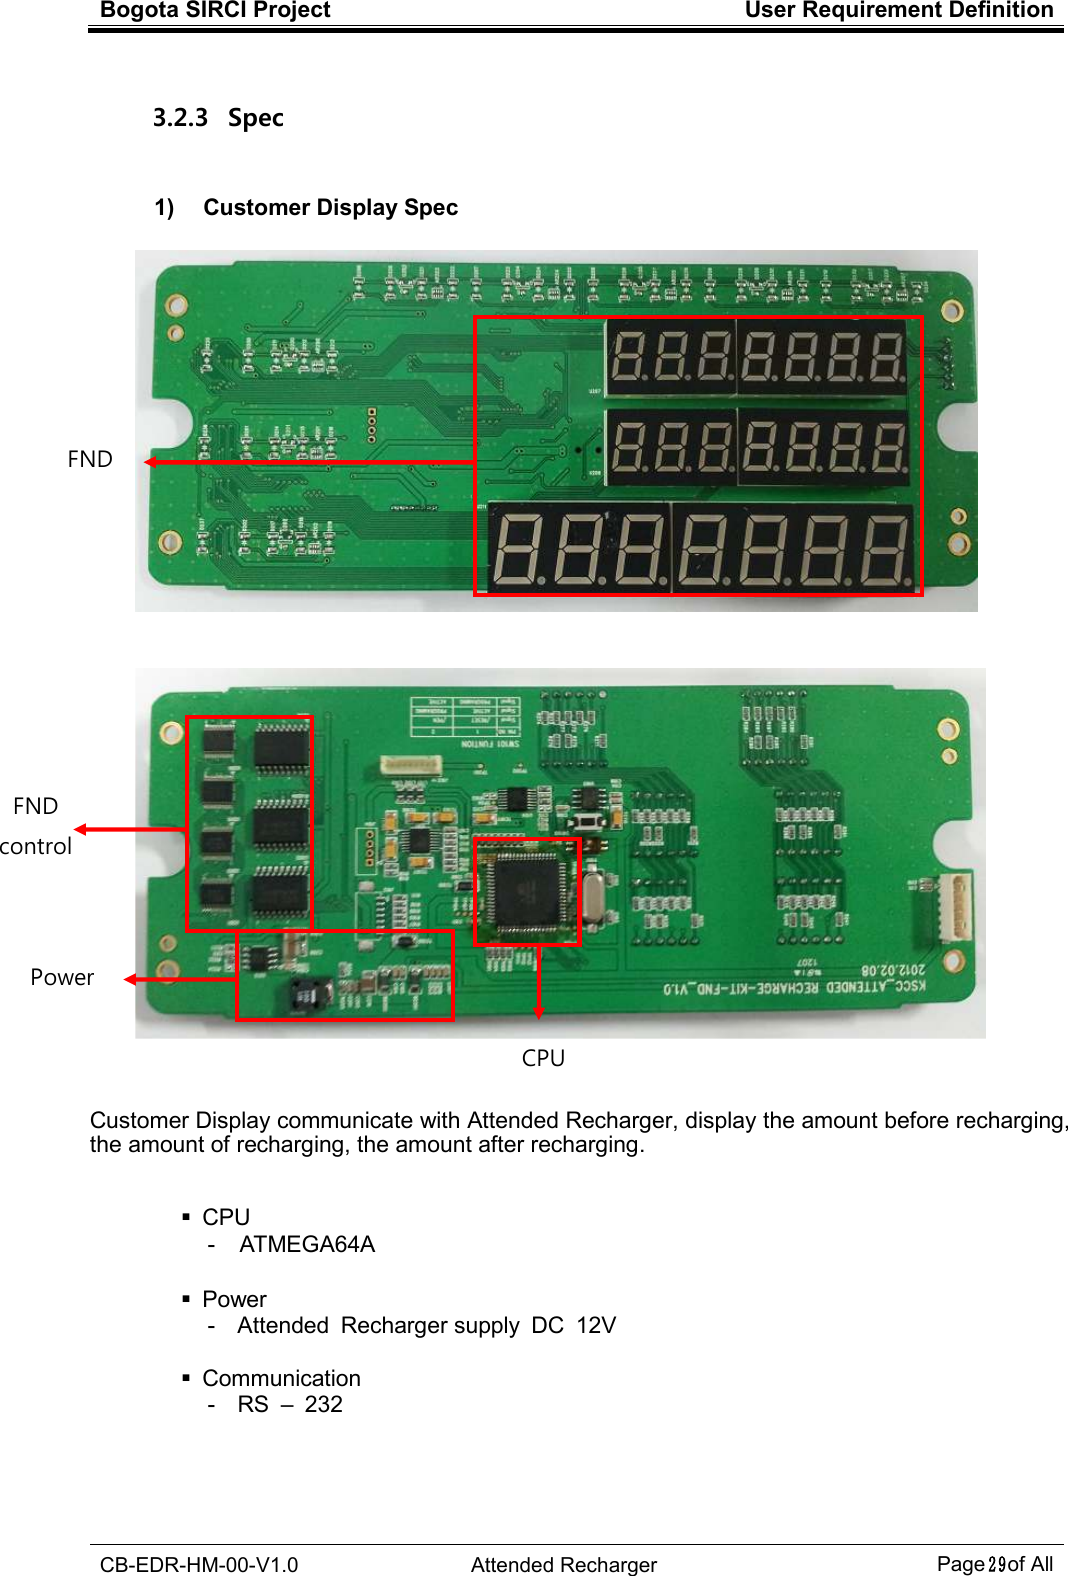 Bogota SIRCI Project  User Requirement Definition  CB-EDR-HM-00-V1.0  Attended Recharger Page２９ of All  3.2.3   Spec  1)    Customer Display Spec         Customer Display communicate with Attended Recharger, display the amount before recharging, the amount of recharging, the amount after recharging.     CPU -  ATMEGA64A      Power -  Attended  Recharger supply  DC  12V      Communication -  RS  –  232 FND   FND   control Power CPU  